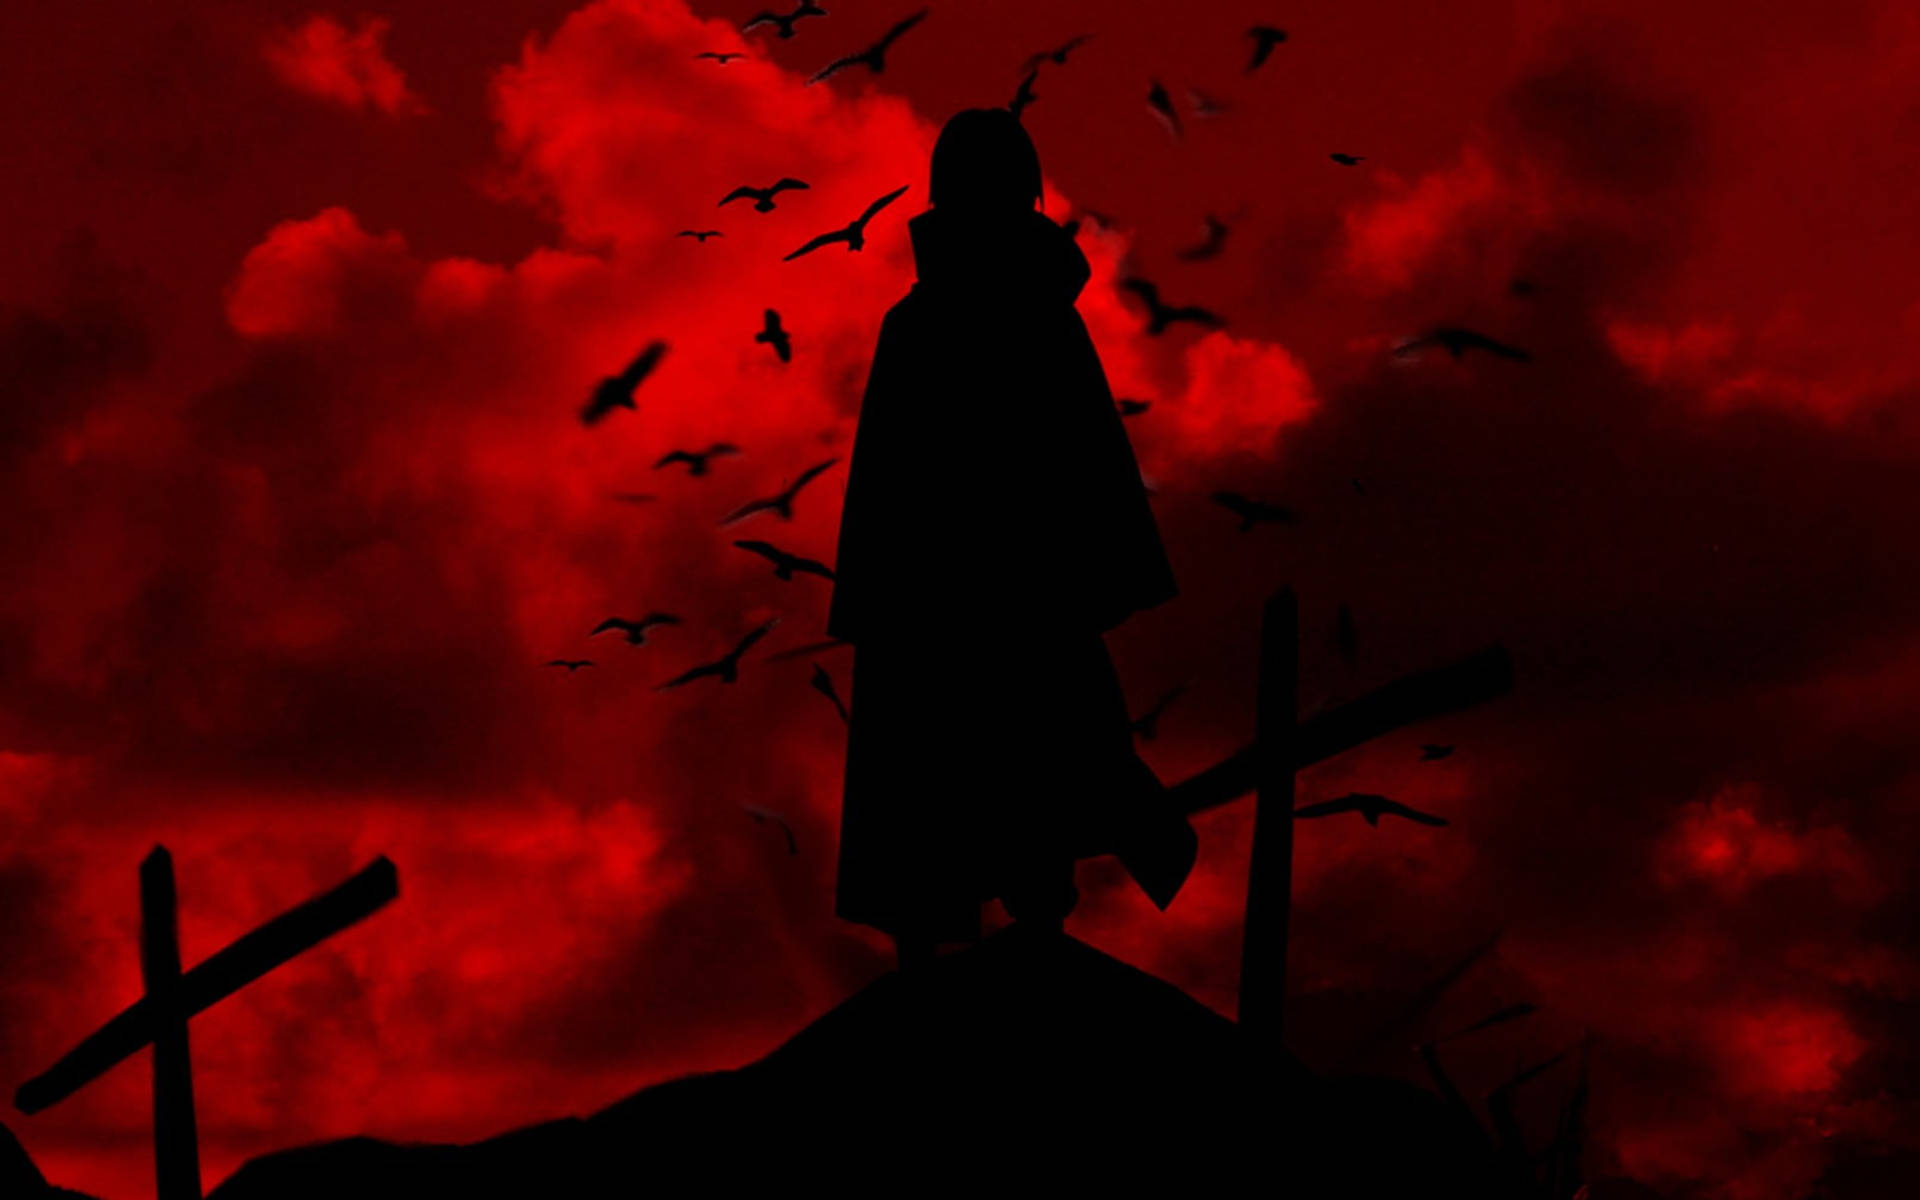 Itachi Black Silhouette On Red Background Wallpaper